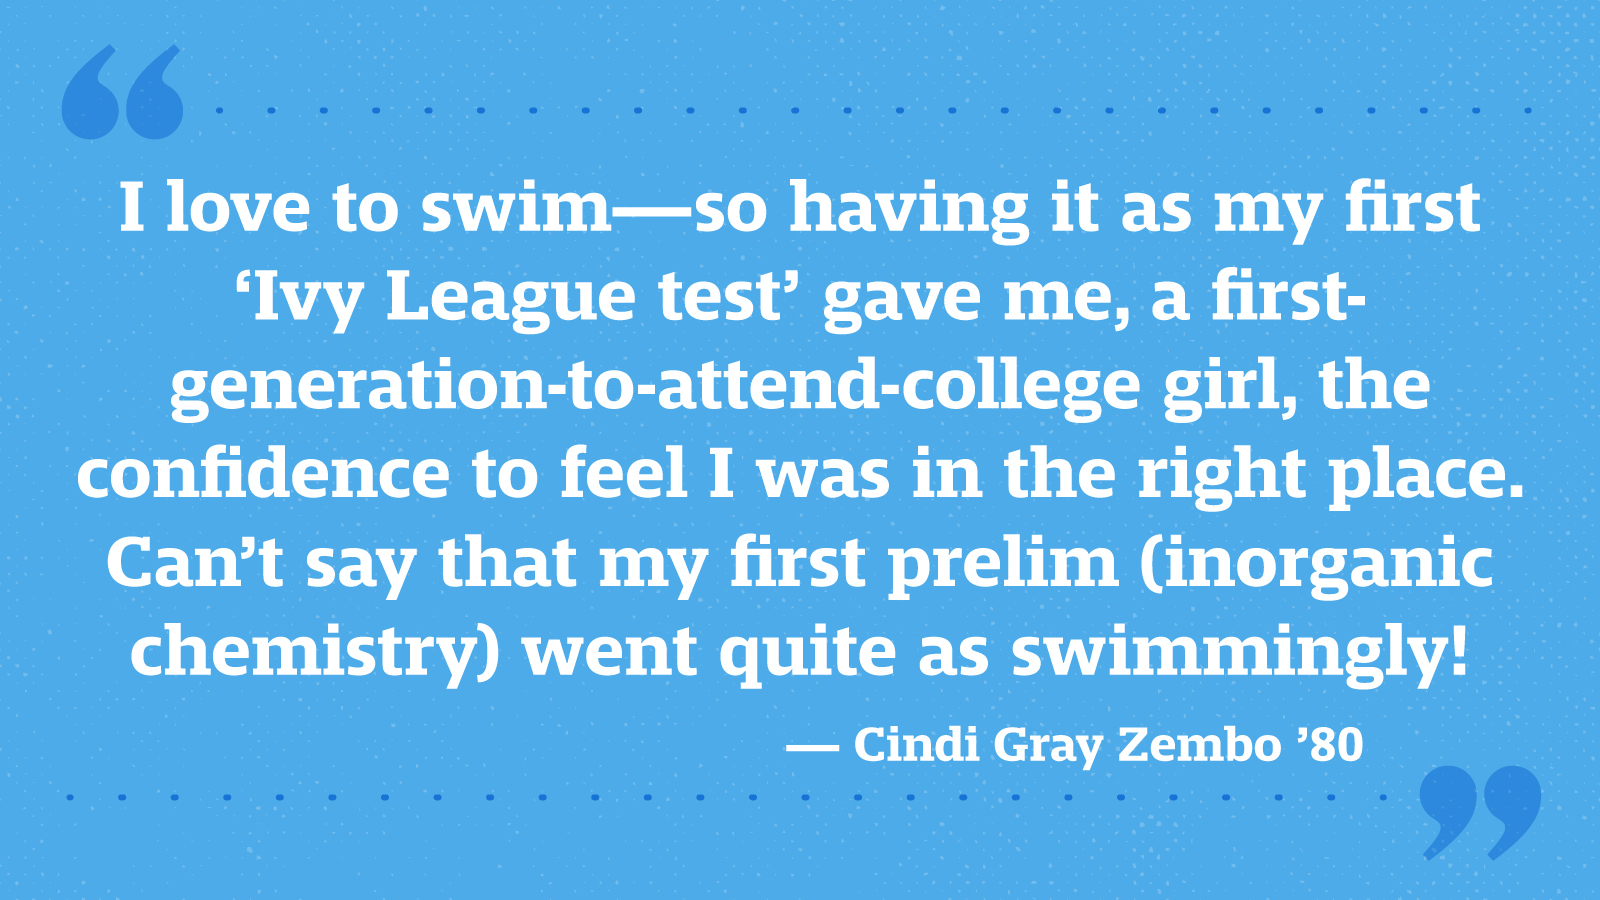 I love to swim—so having it as my first ‘Ivy League test’ gave me, a first-generation-to-attend-college girl, the confidence to feel I was in the right place. Can’t say that my first prelim (inorganic chemistry) went quite as swimmingly! — Cindi Gray Zembo ’80